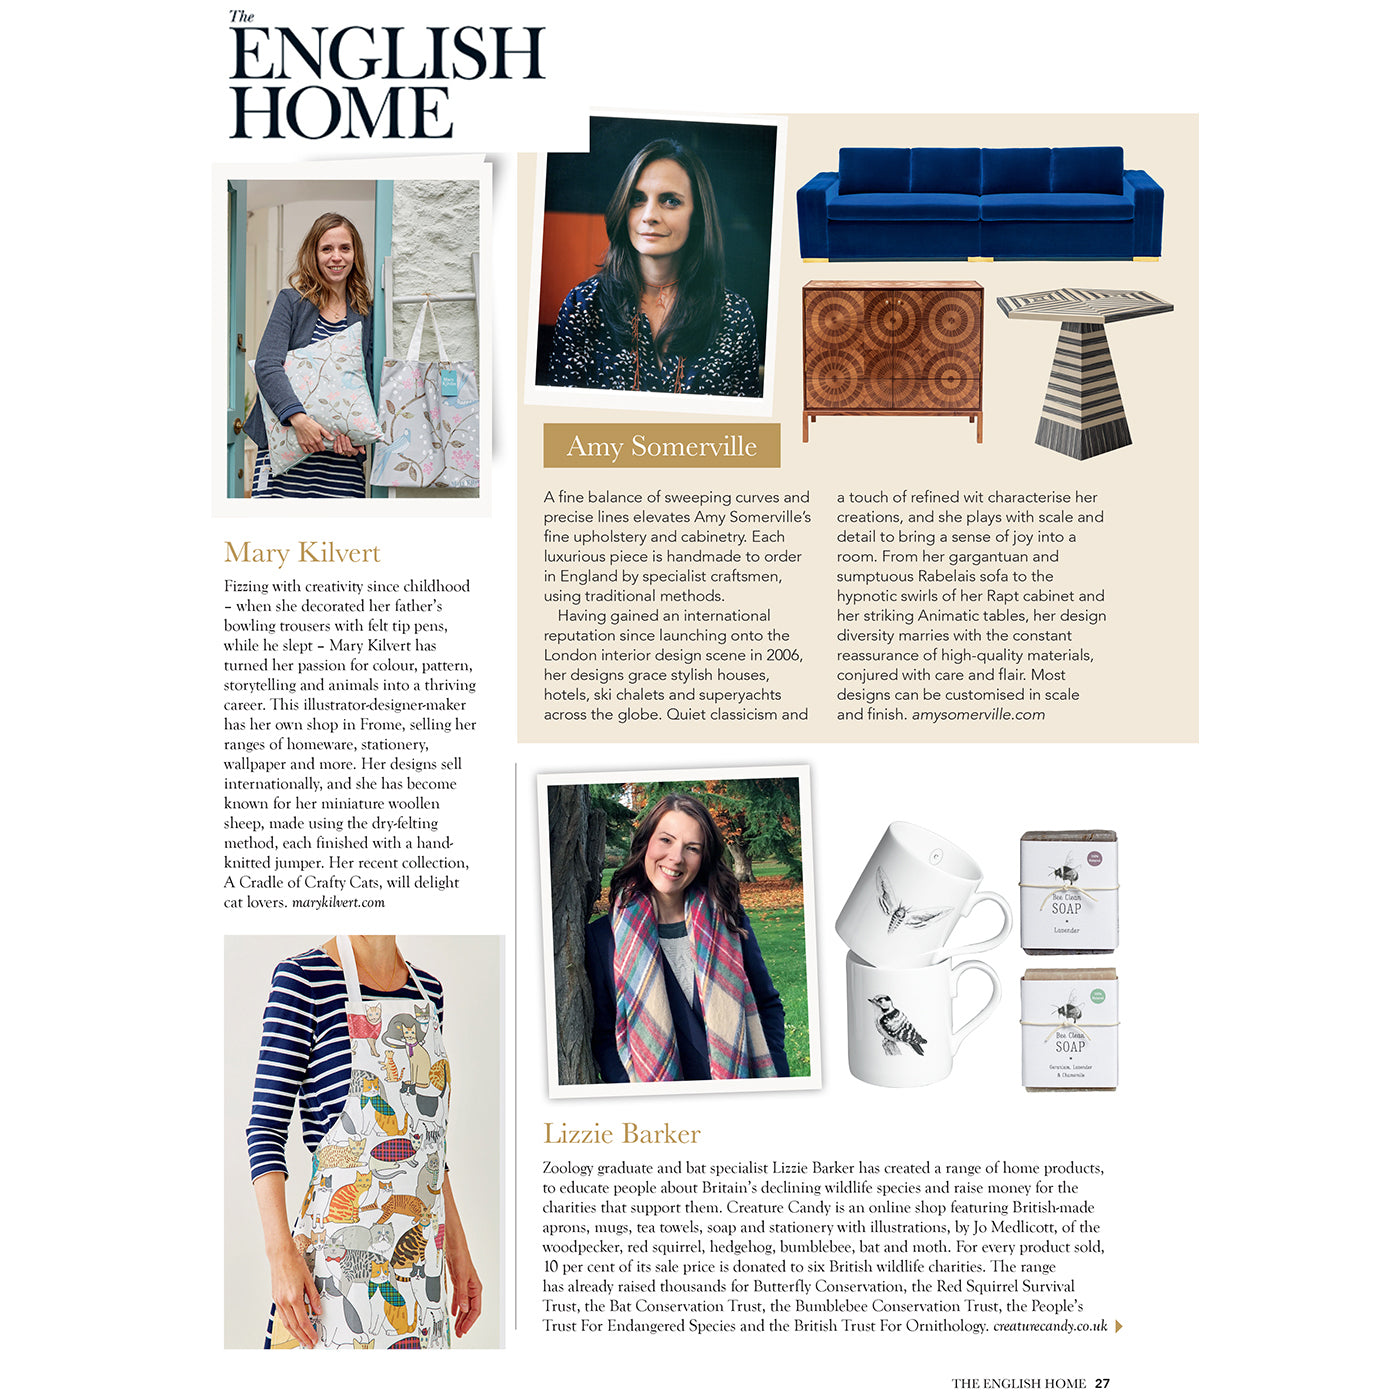 Mary Kilvert feature in The English Home magazine